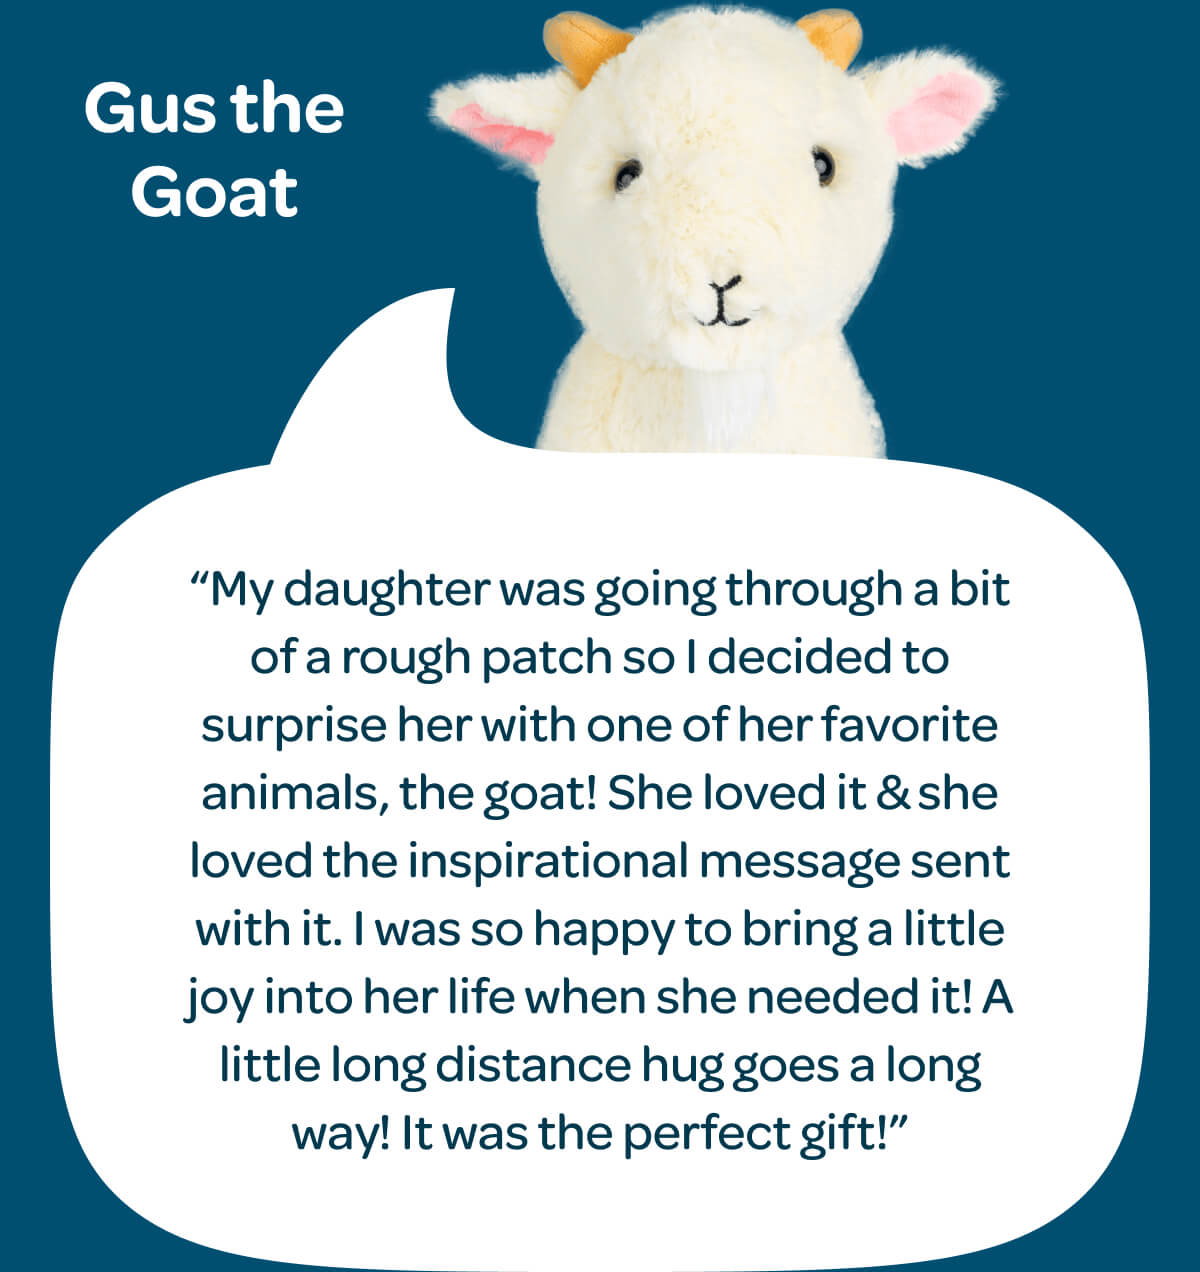 Gus the Goat. “My daughter was going through a bit of a rough patch so I decided to surprise her with one of her favorite animals, the goat! She loved it & she loved the inspirational message sent with it. I was so happy to bring a little joy into her life when she needed it! A little long distance hug goes a long way! It was the perfect gift!”